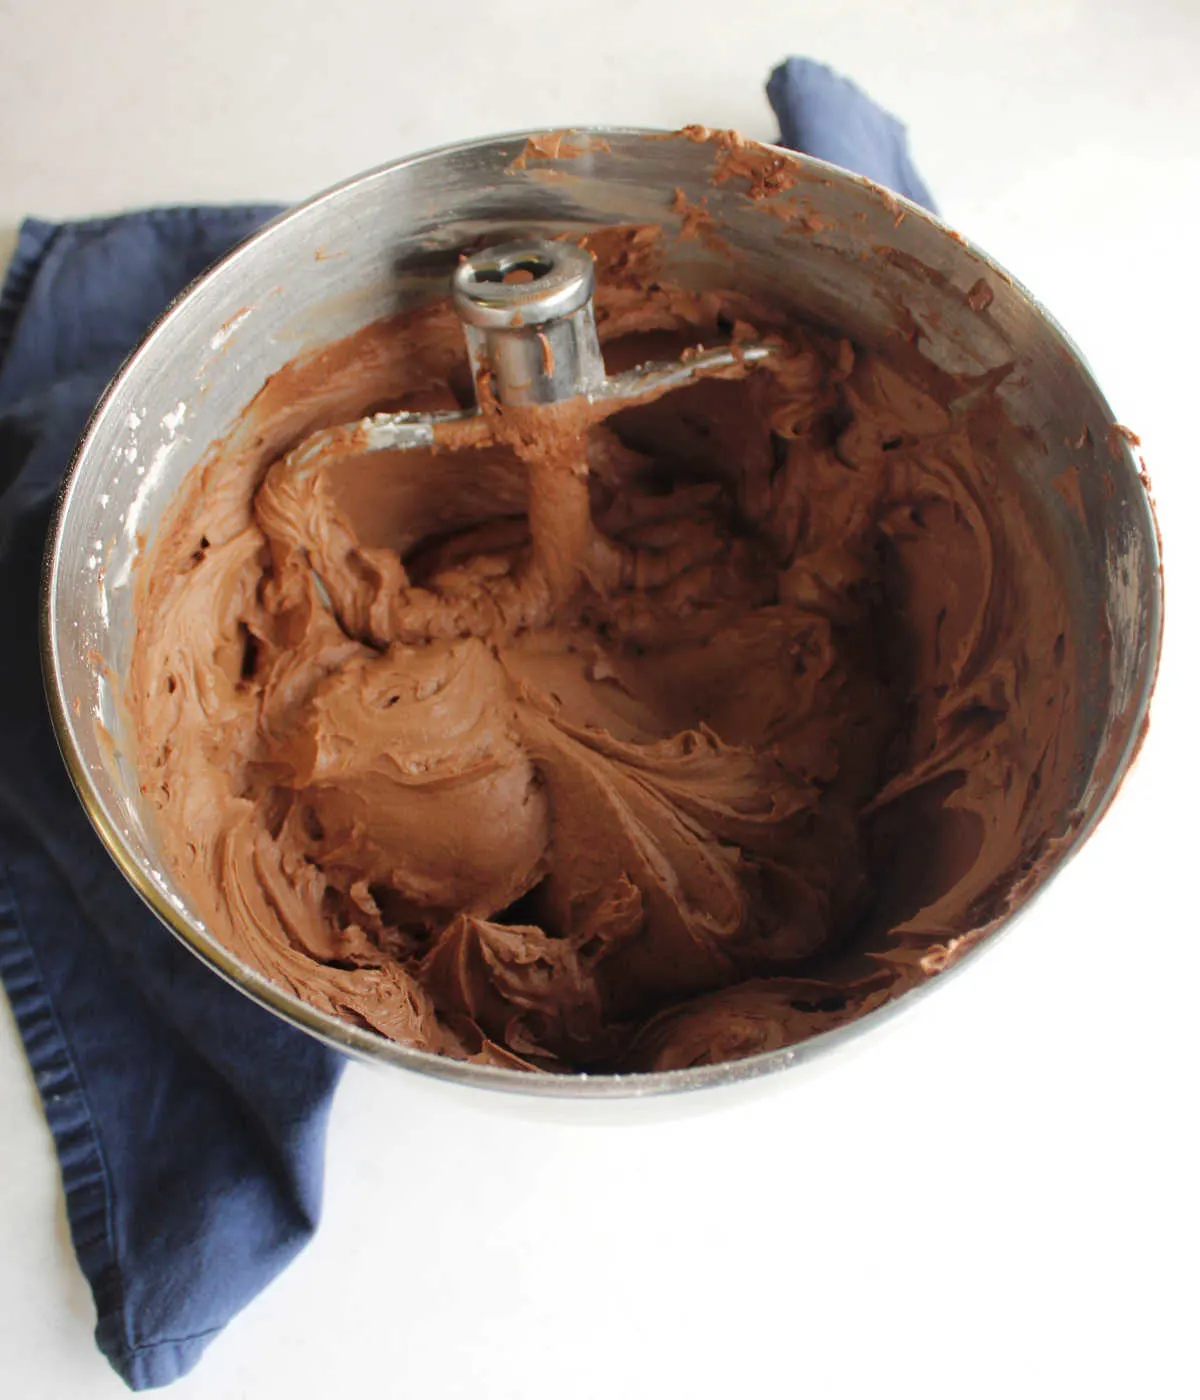 Mixer bowl filled with chocolate fudge frosting and mixer paddle showing creamy chocolate texture.